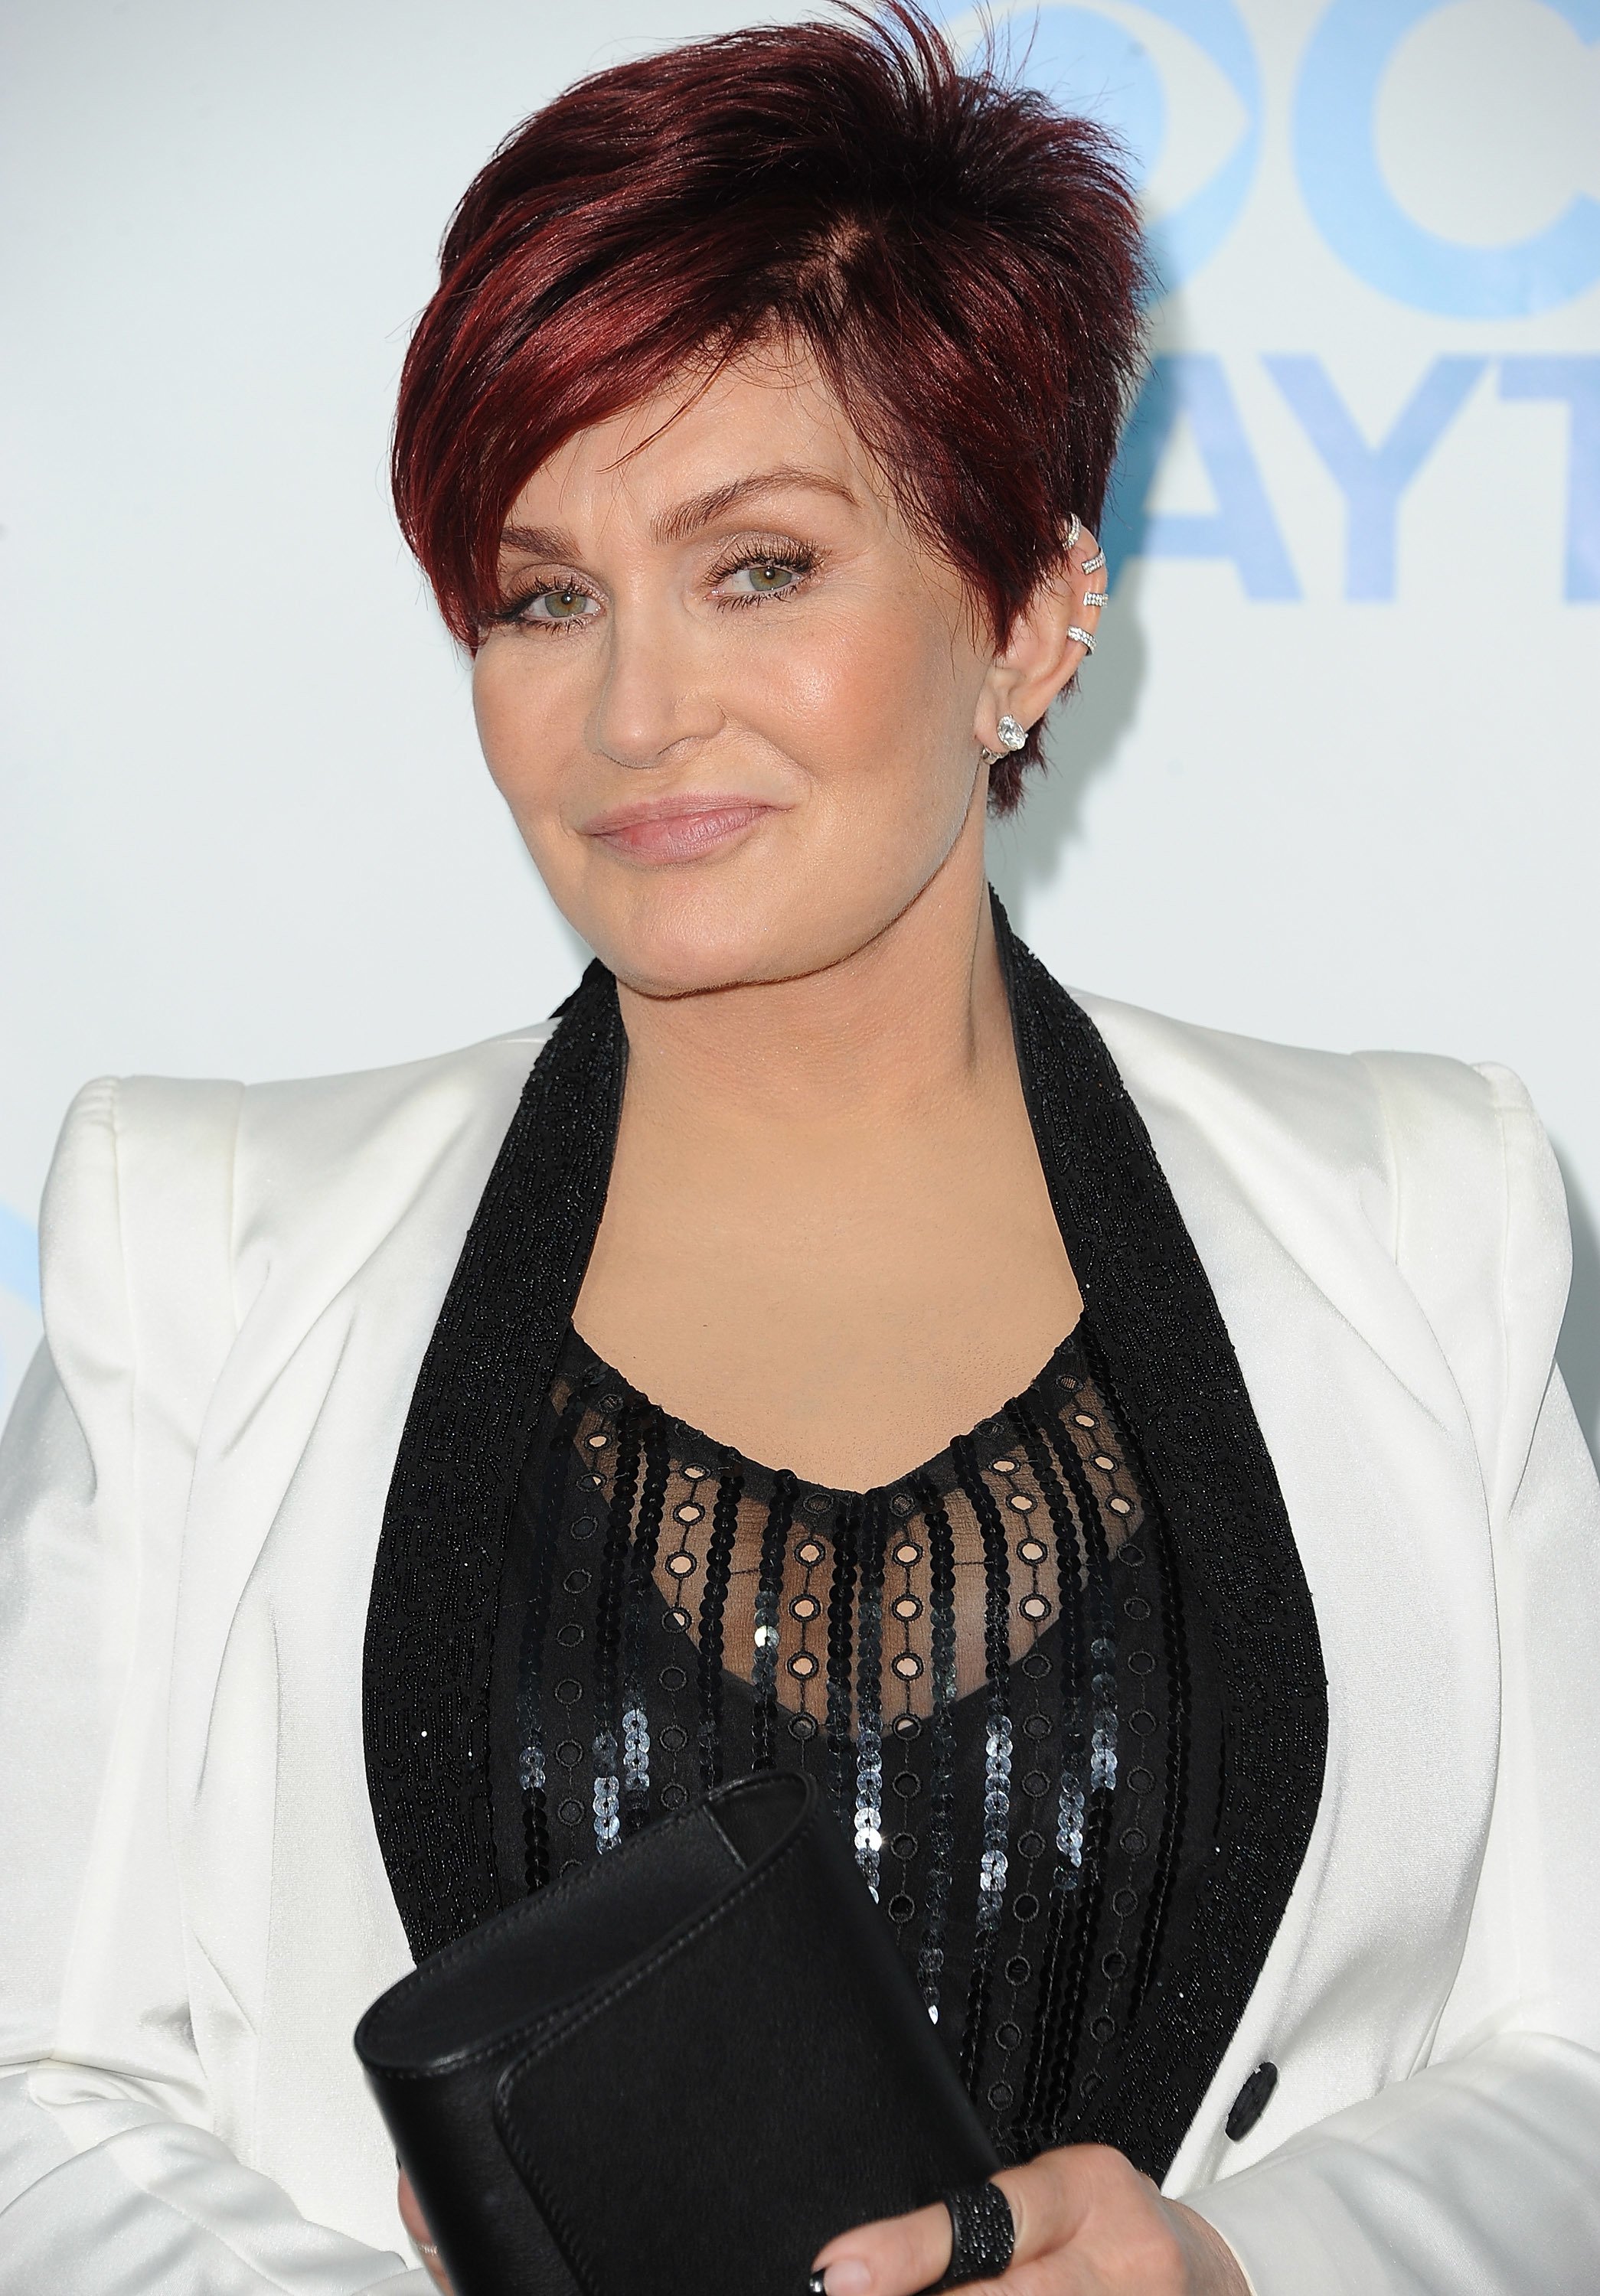 Sharon Osbourne attends the 41st Annual Daytime Emmy Awards CBS after party at The Beverly Hilton Hotel on June 22, 2014 in Beverly Hills, California | Photo: Getty Images